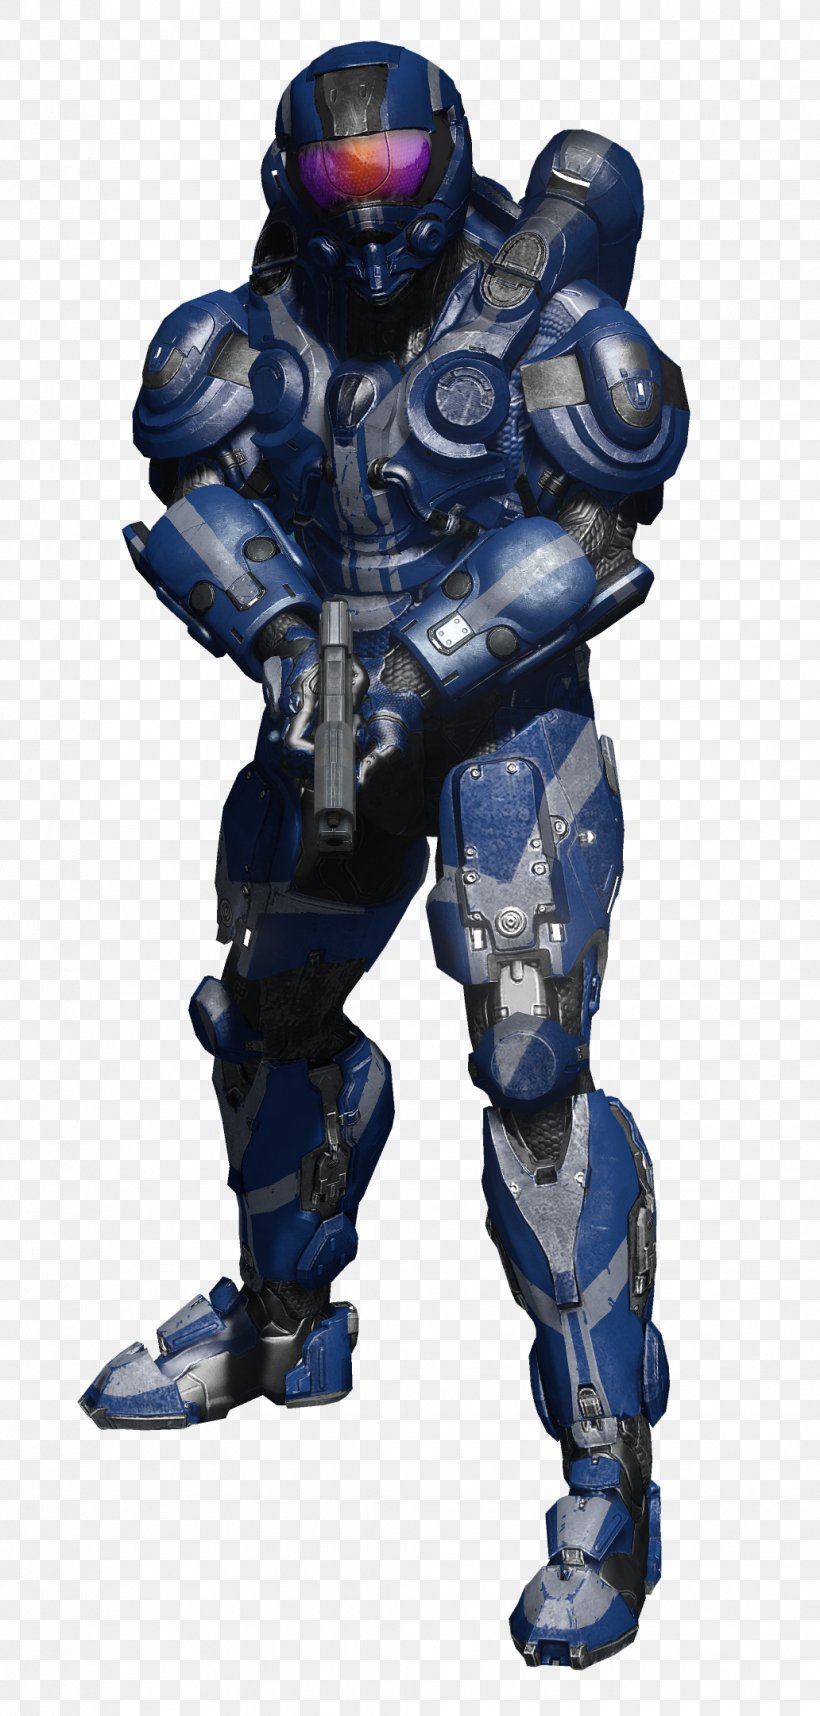 Halo 4 Halo: Spartan Assault Halo 5: Guardians Halo: Reach Halo 3: ODST, PNG, 1032x2160px, 343 Industries, Halo 4, Action Figure, Armour, Concept Art Download Free